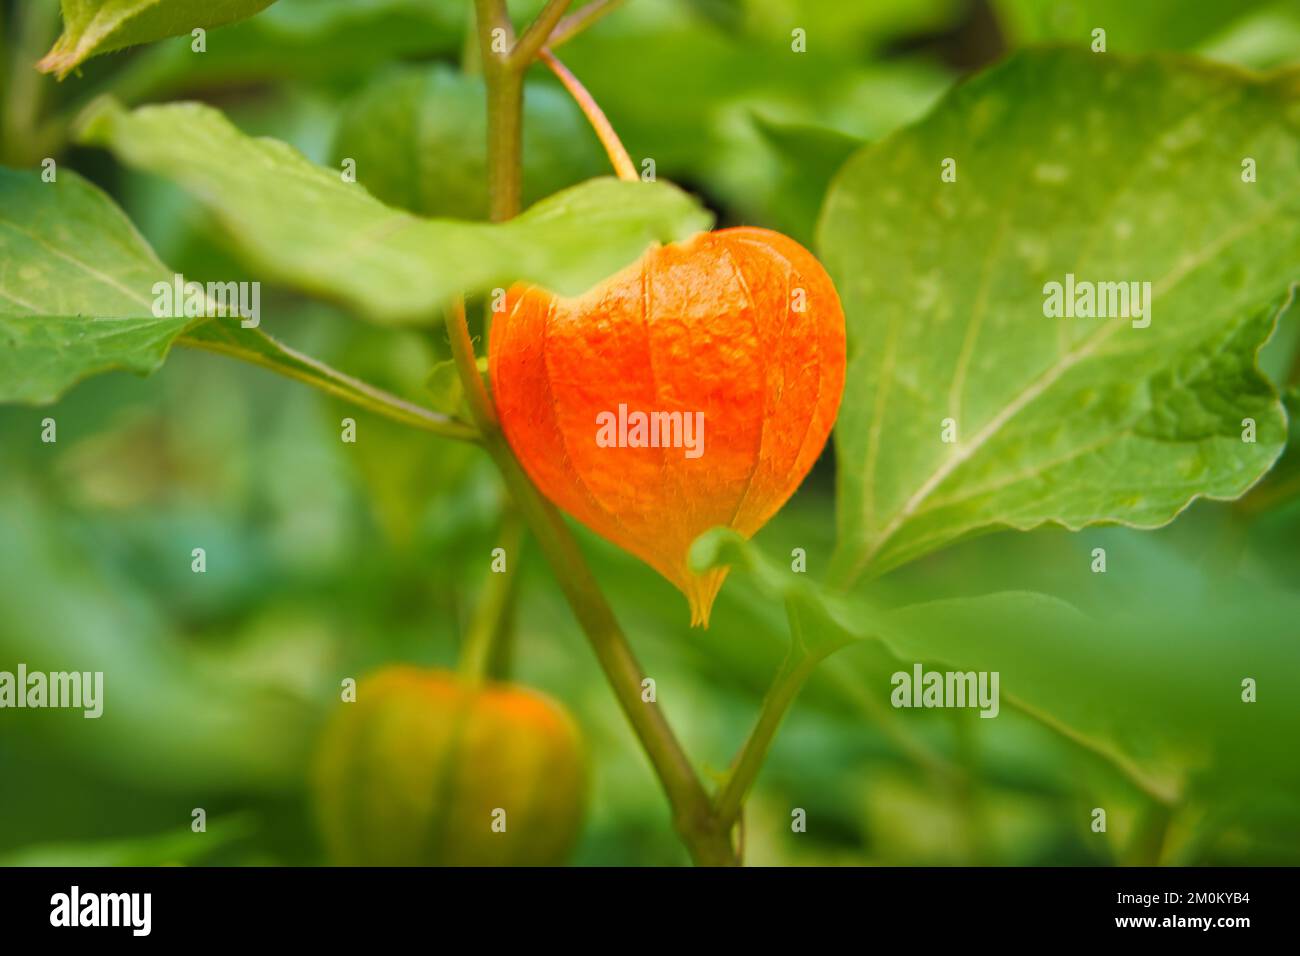 Physalis, cape gooseberry hangs on the bush. Orange fruit with green leaves. Vitamin rich fruit. Close up from garden Stock Photo